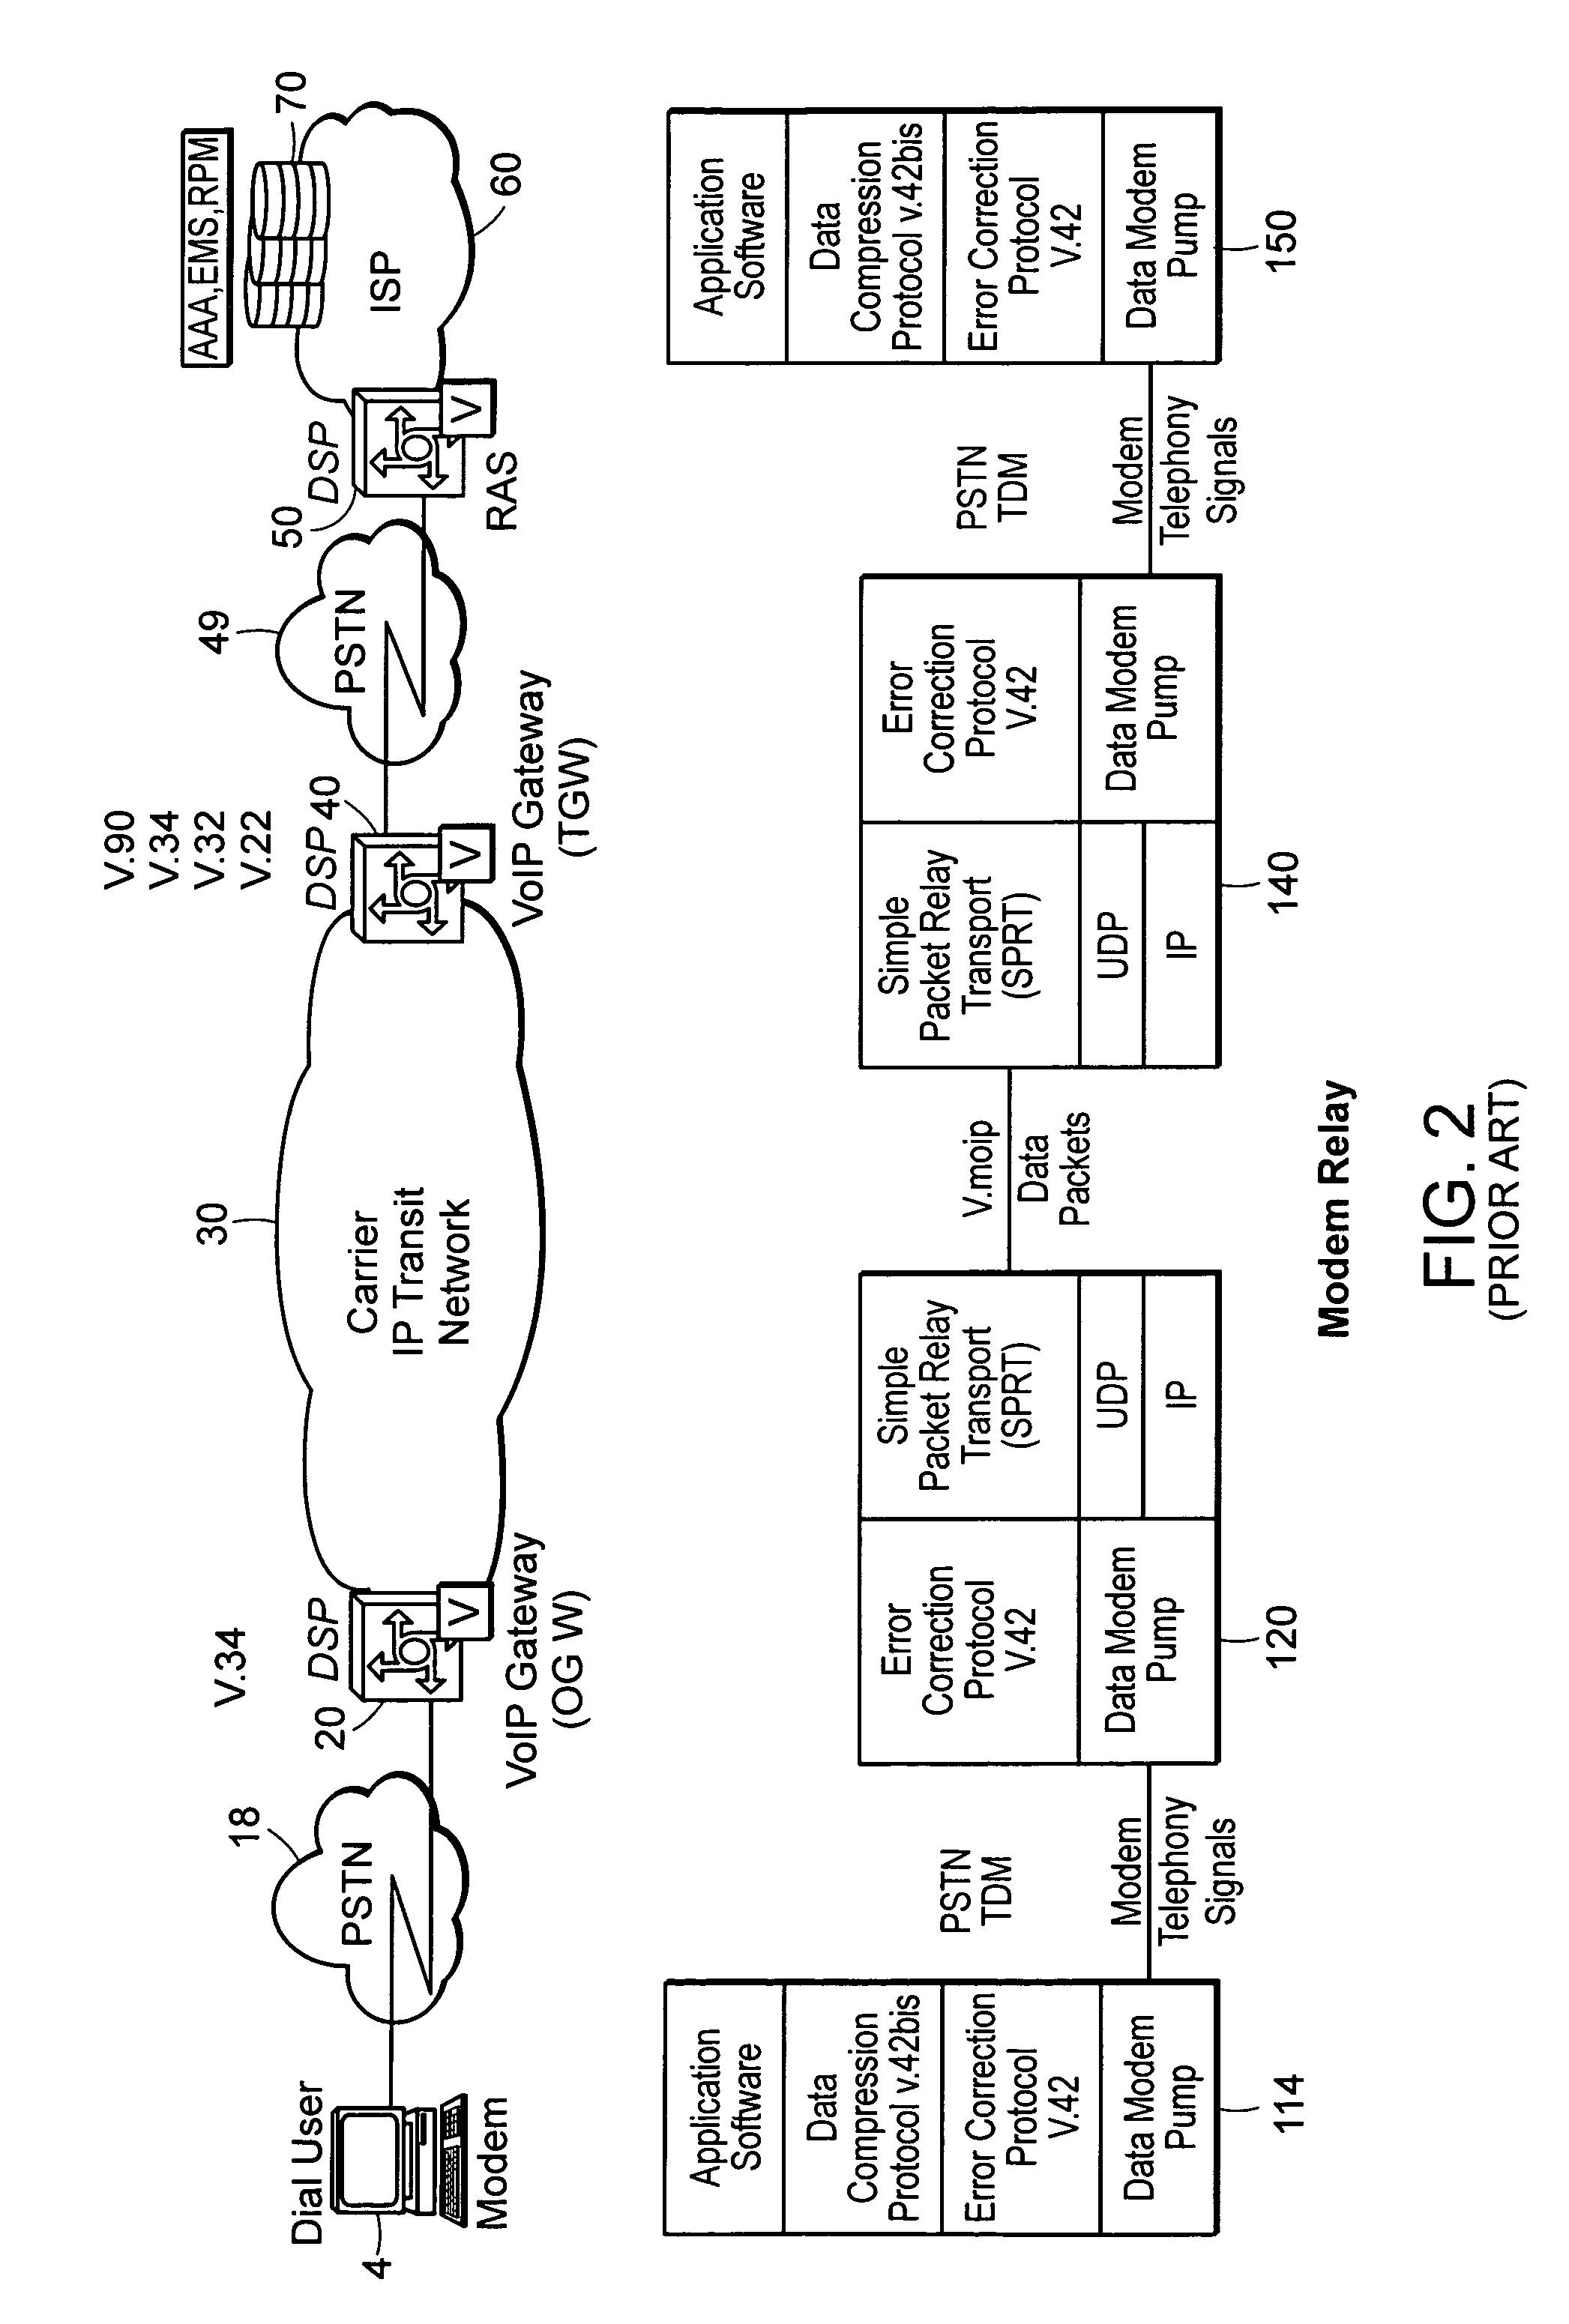 Device to terminate a modem relay channel directly to an IP network